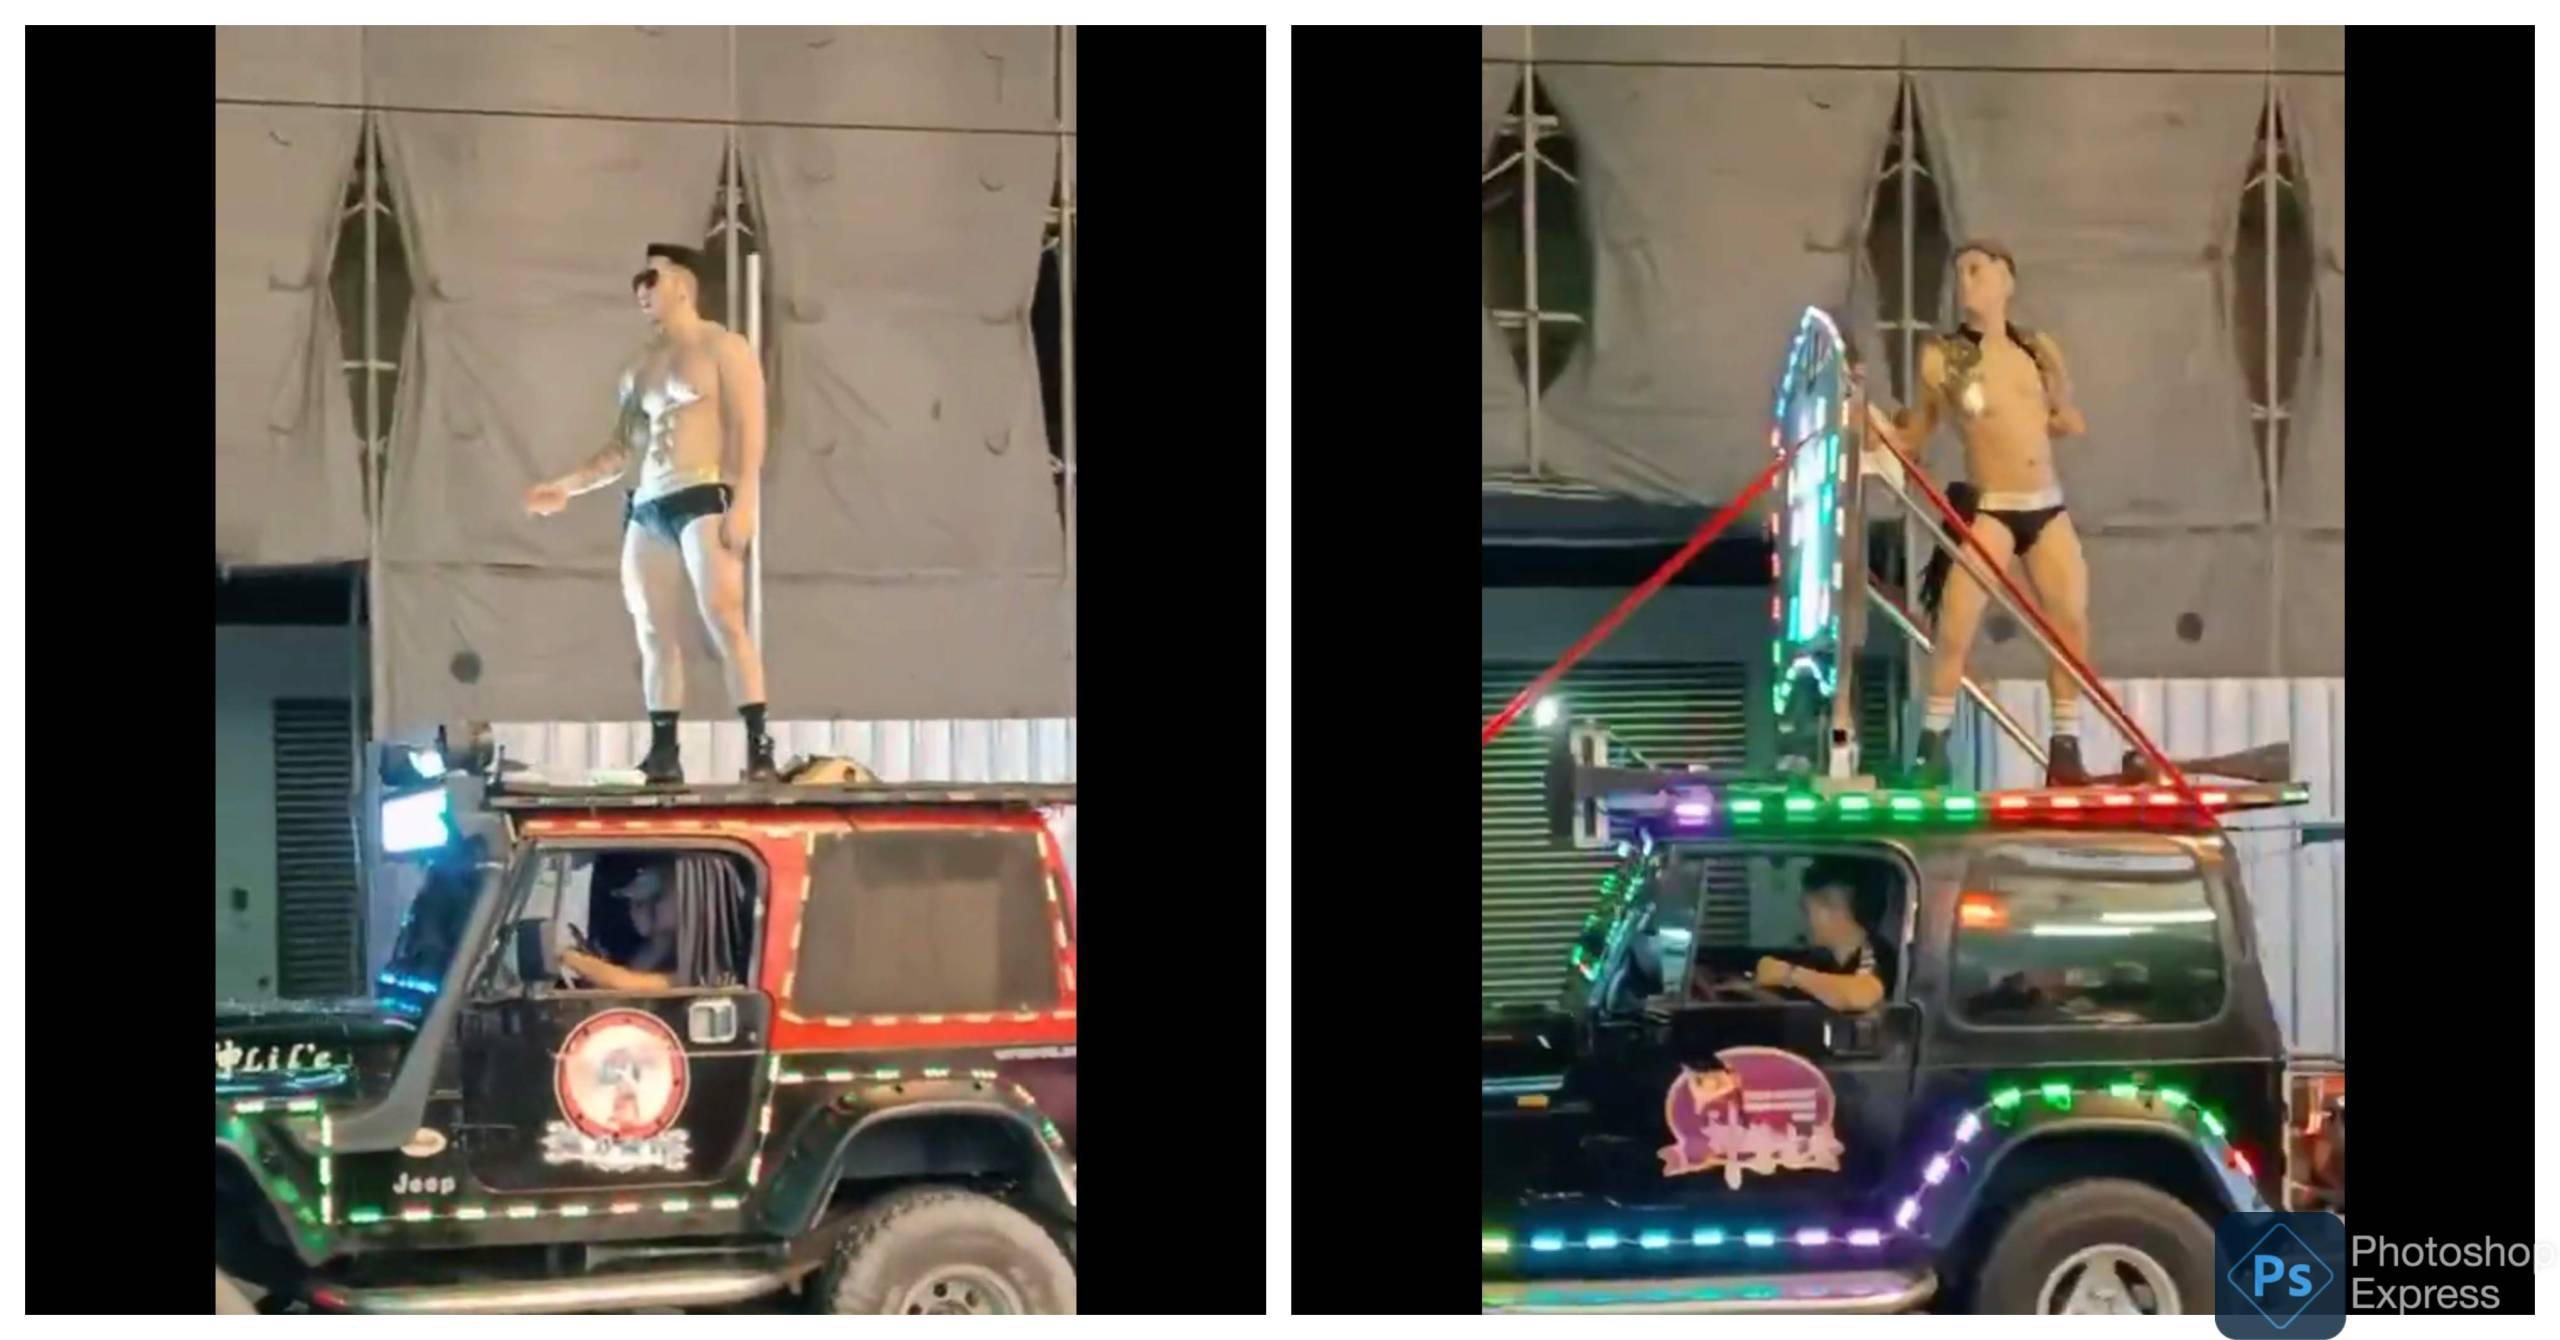 TAIWAN MEN POLE DANCING ON TOP OF CARS IN CONVOY